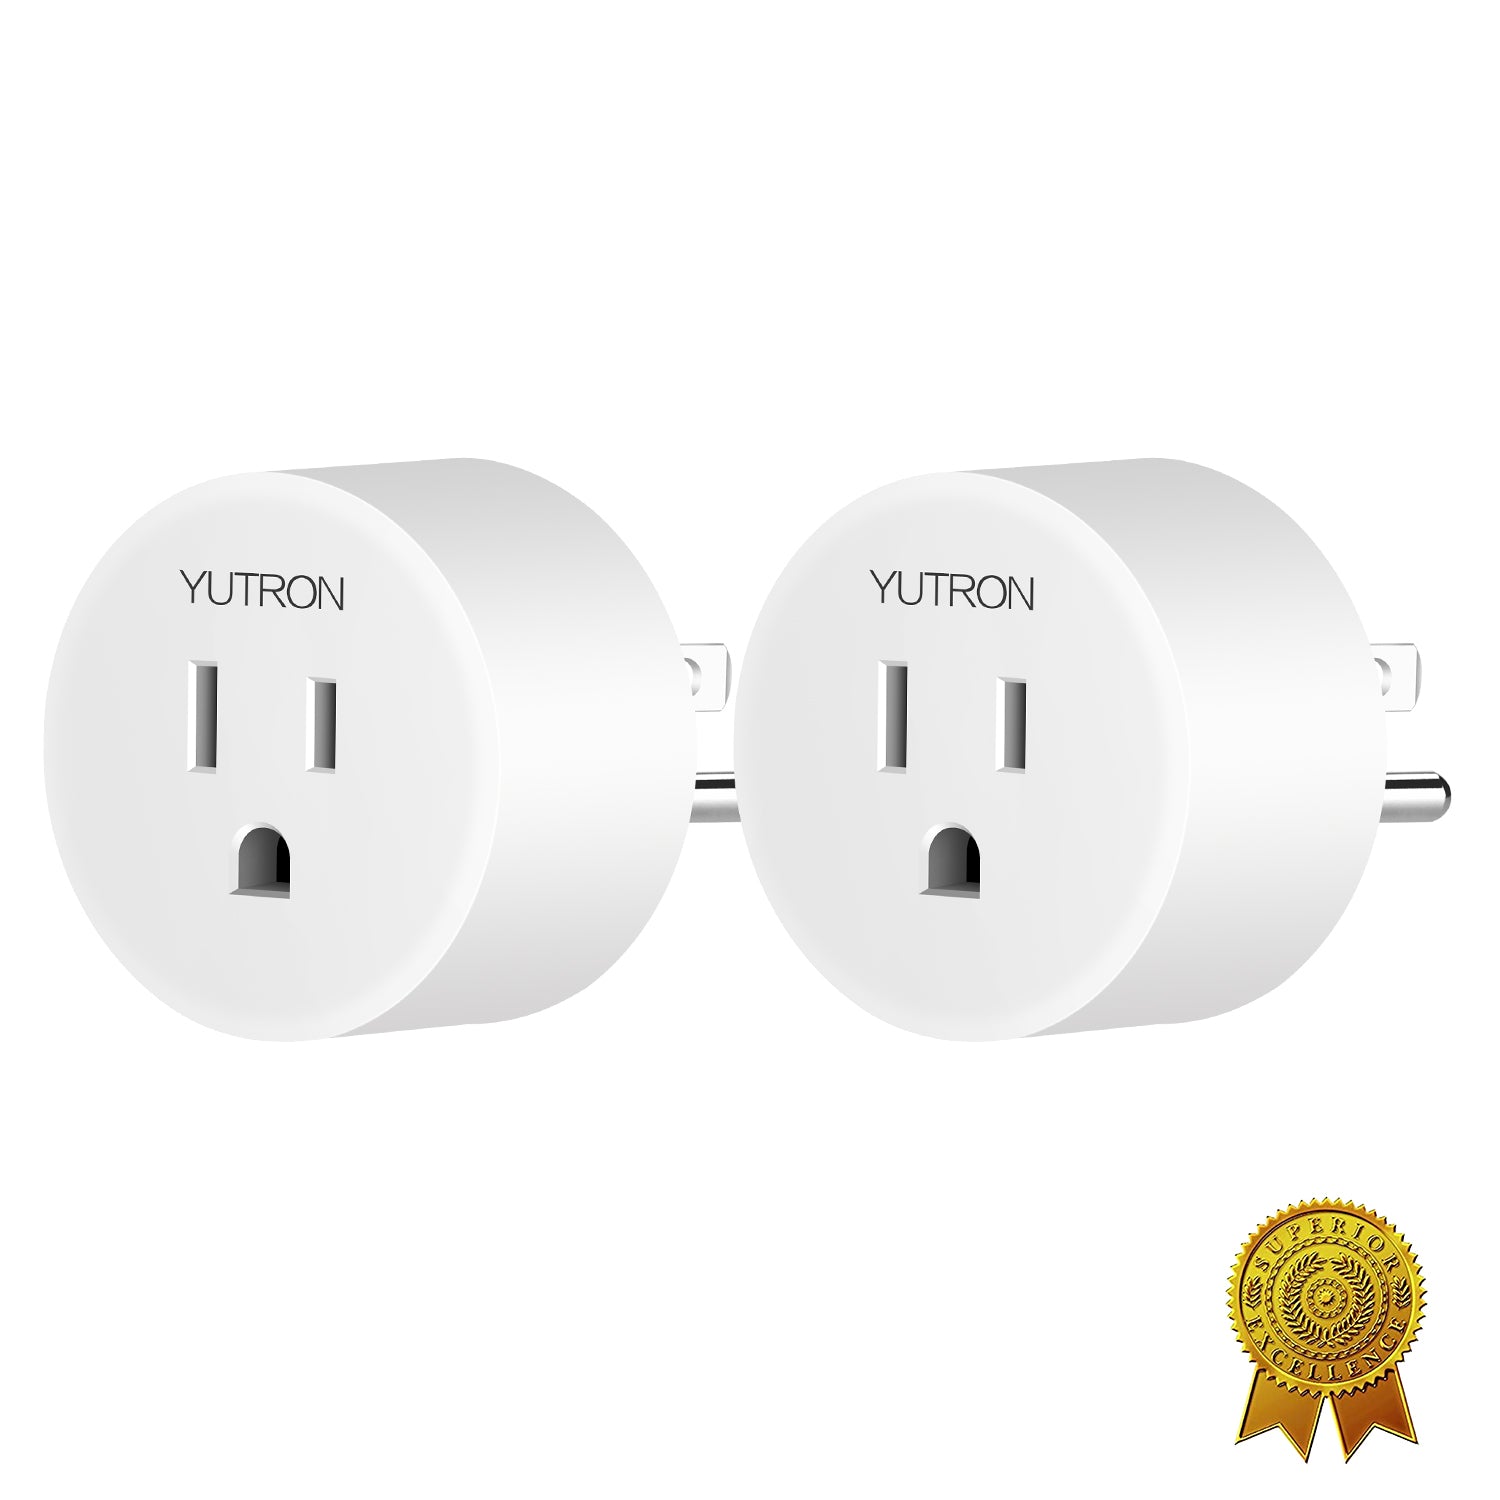 Smart Plug V2 in White- Works with Alexa